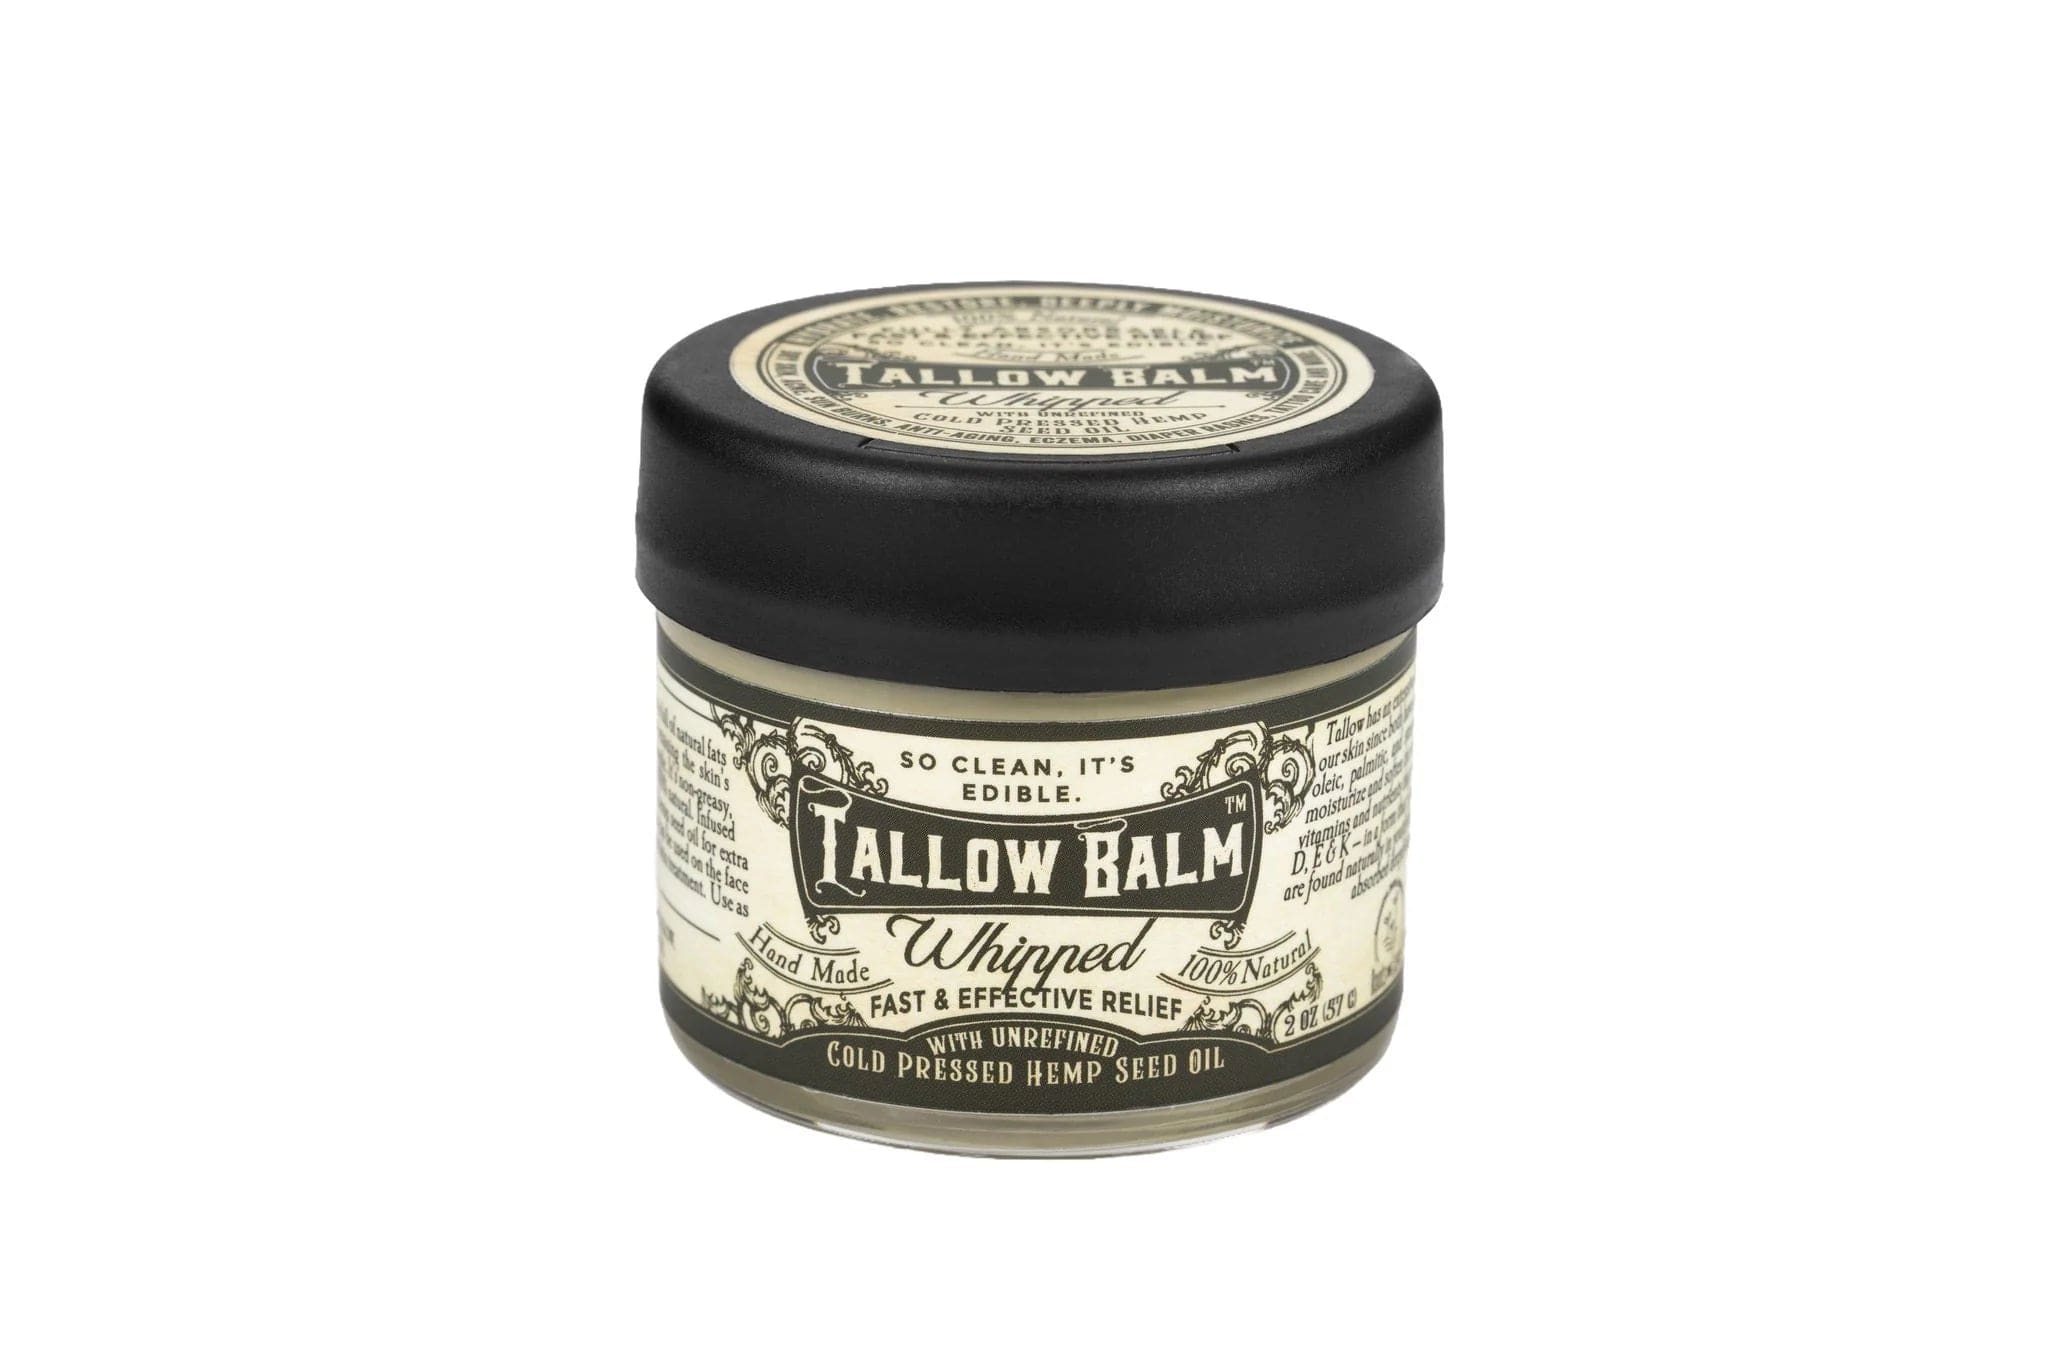 Roots and Leaves Personal Care Tallow Balm